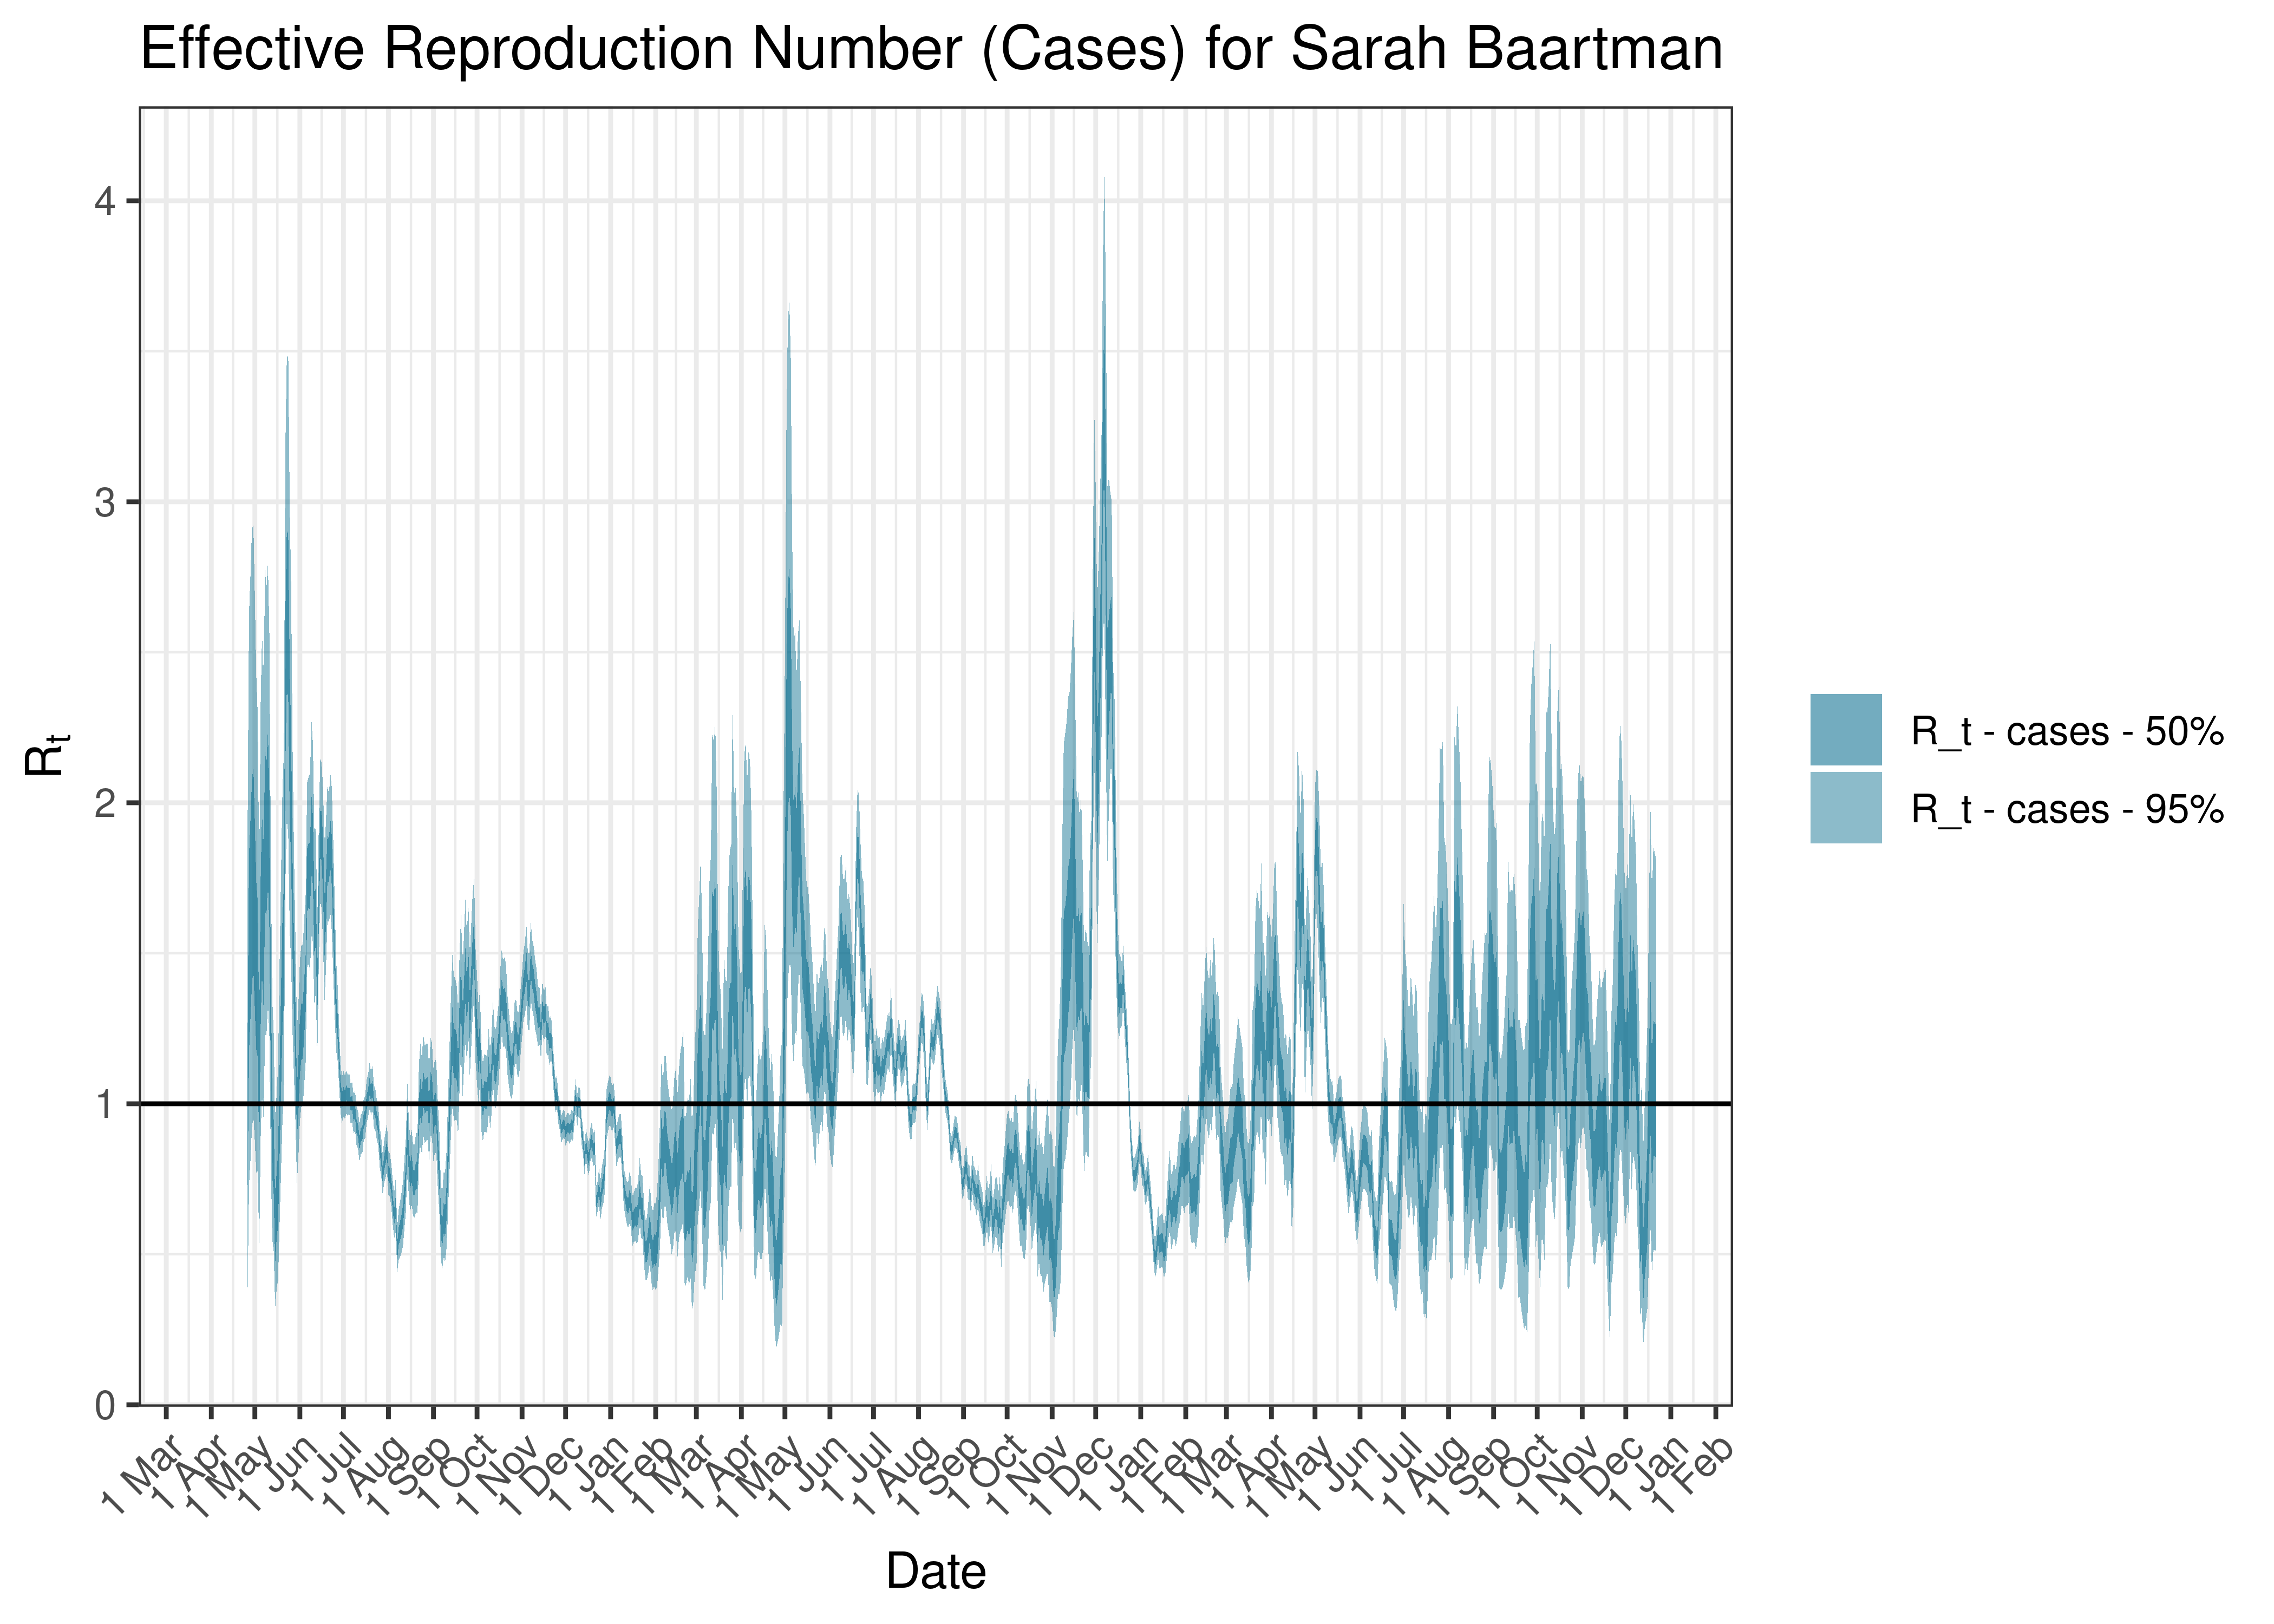 Estimated Effective Reproduction Number Based on Cases for Sarah Baartman since 1 April 2020